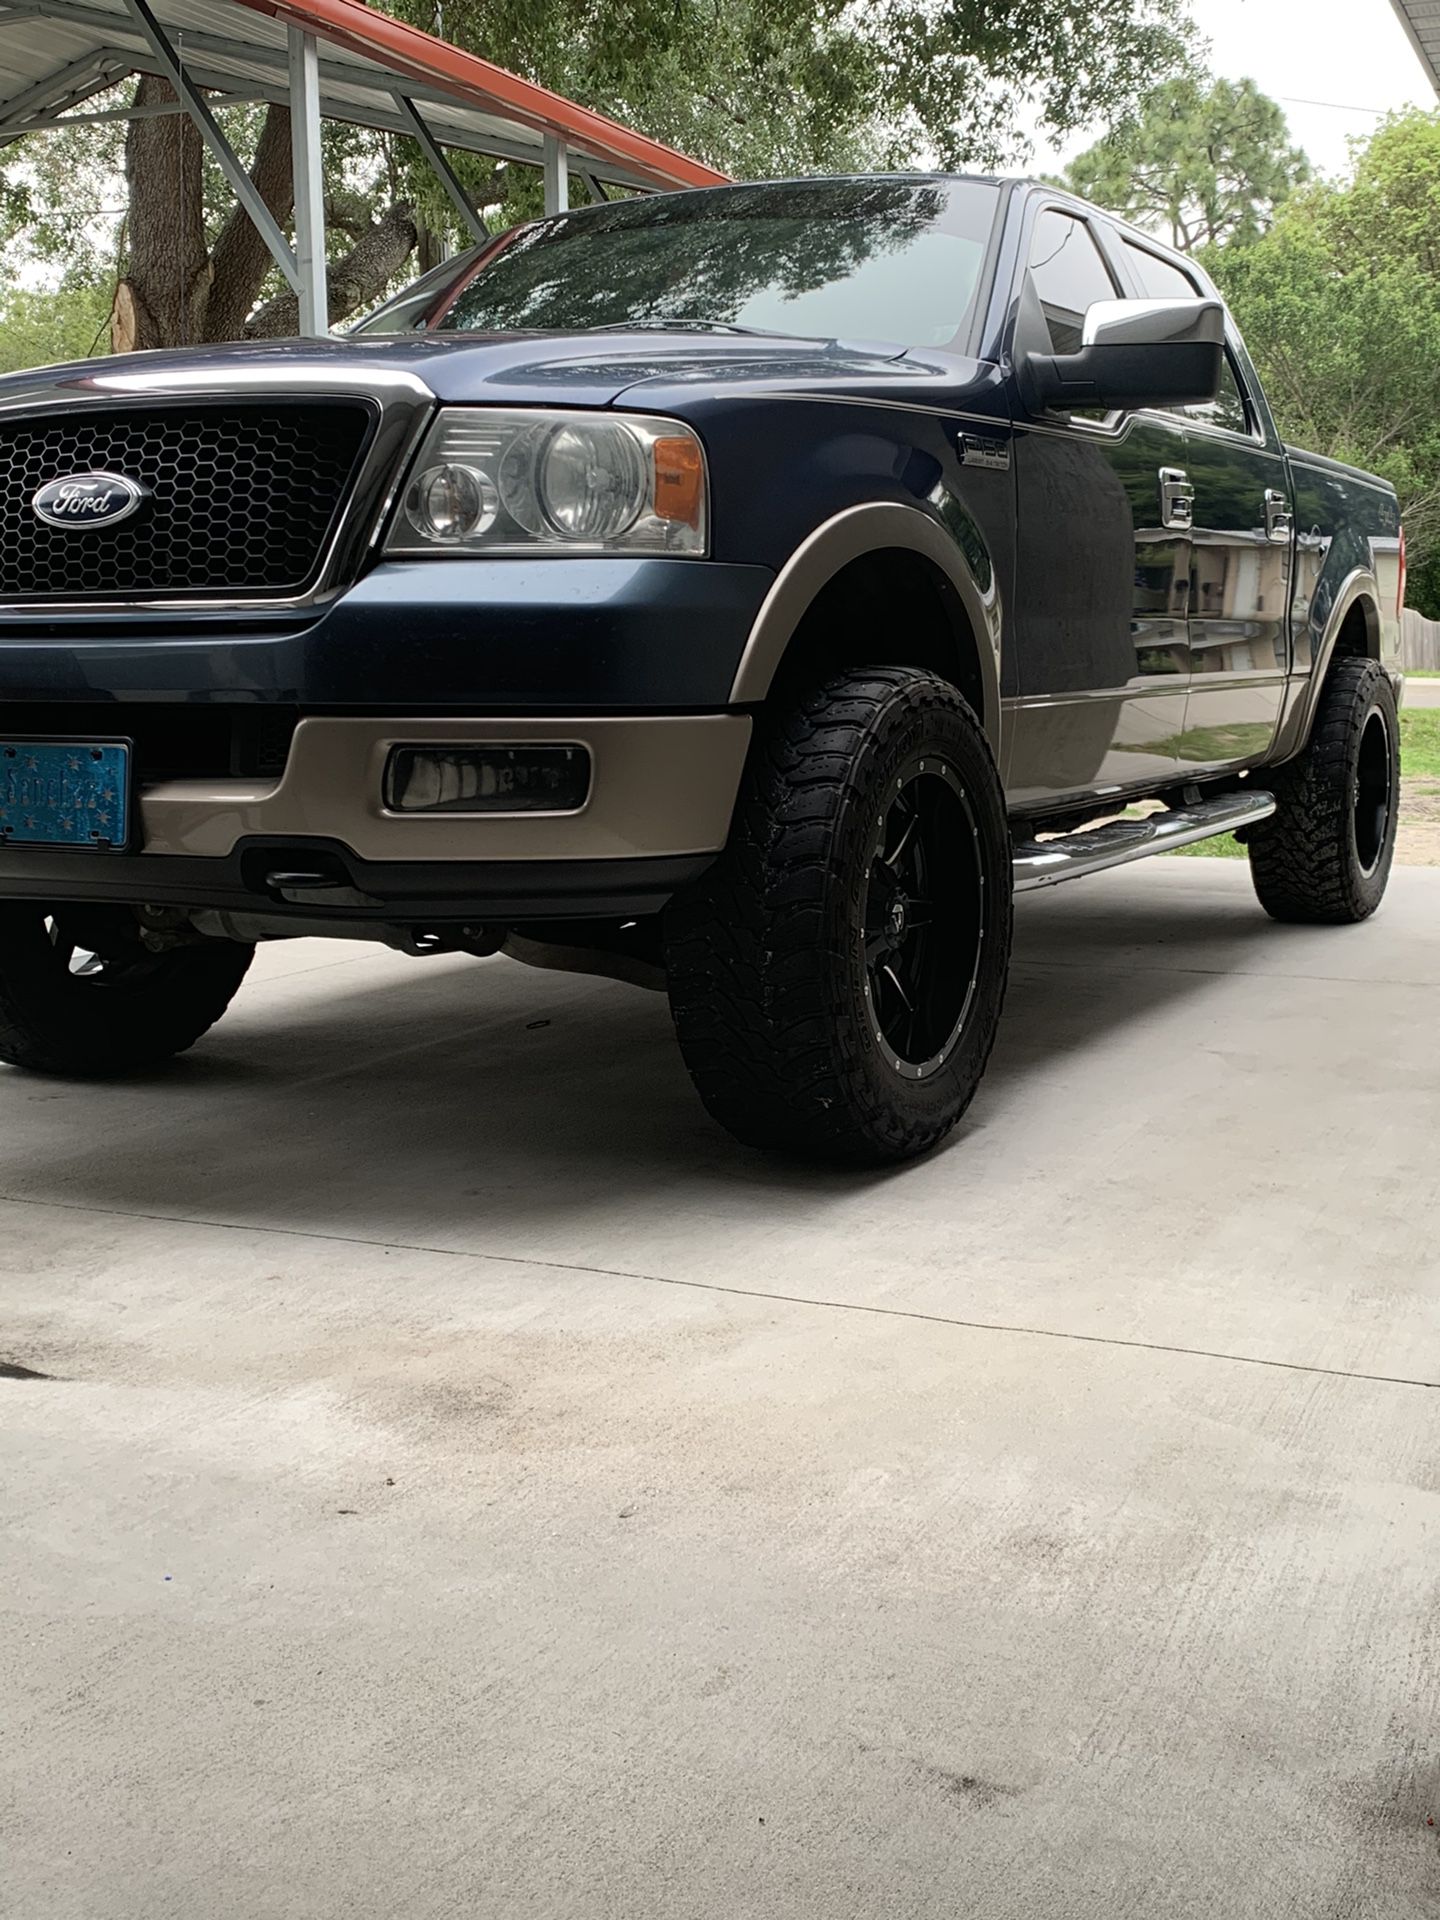 Ford F-150 2005 grille and headlights